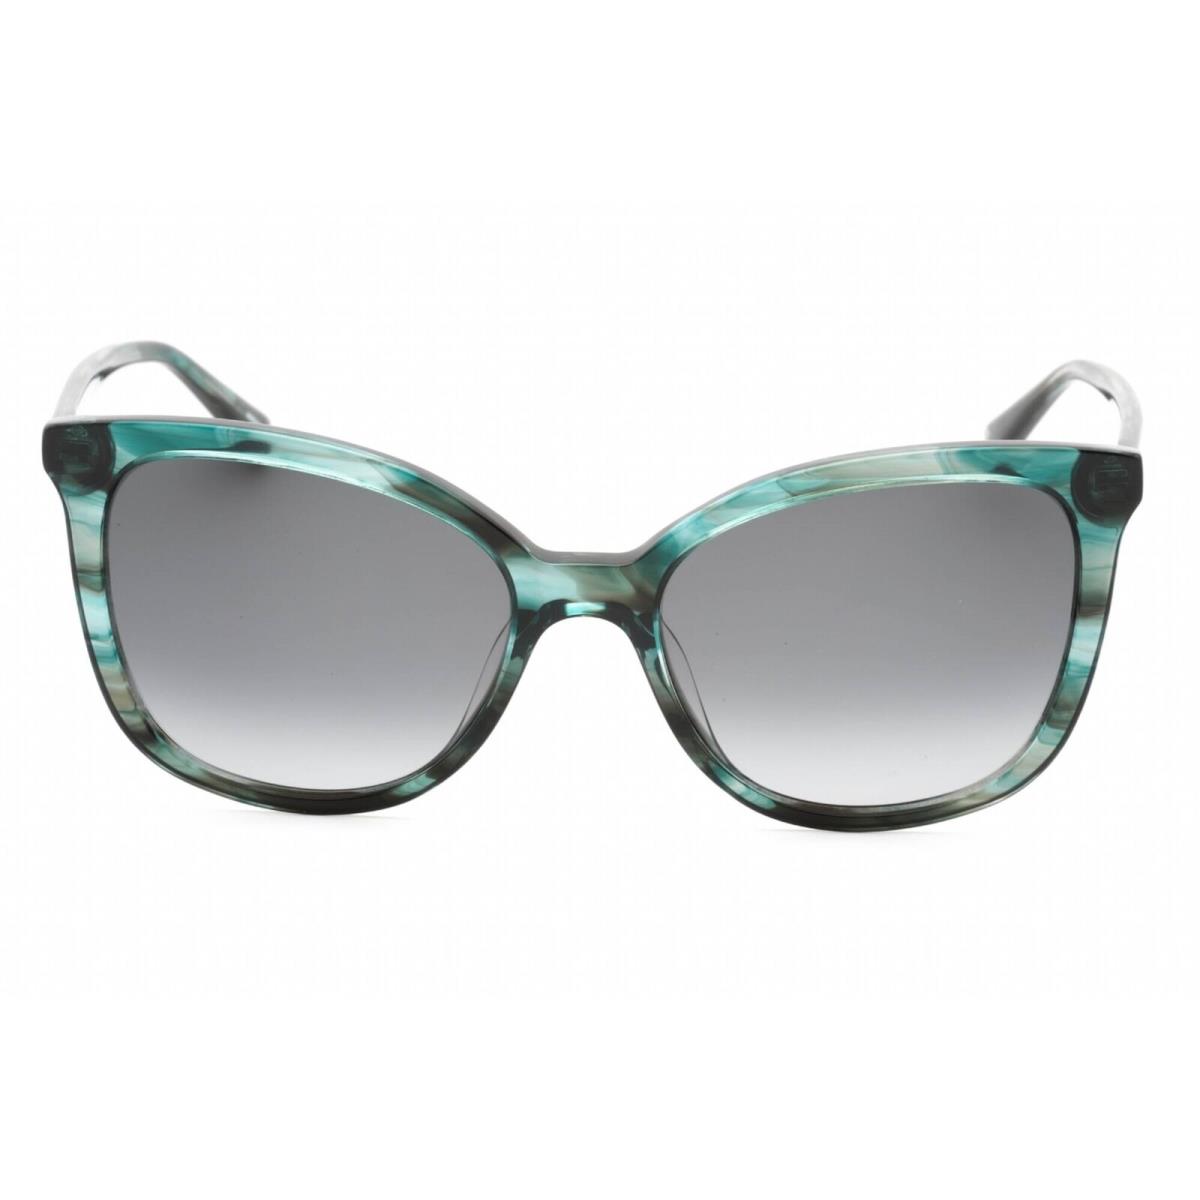 Juicy Couture Women`s Sunglasses Teal Butterfly Plastic Frame JU 623/G/S 0ZI9 9O